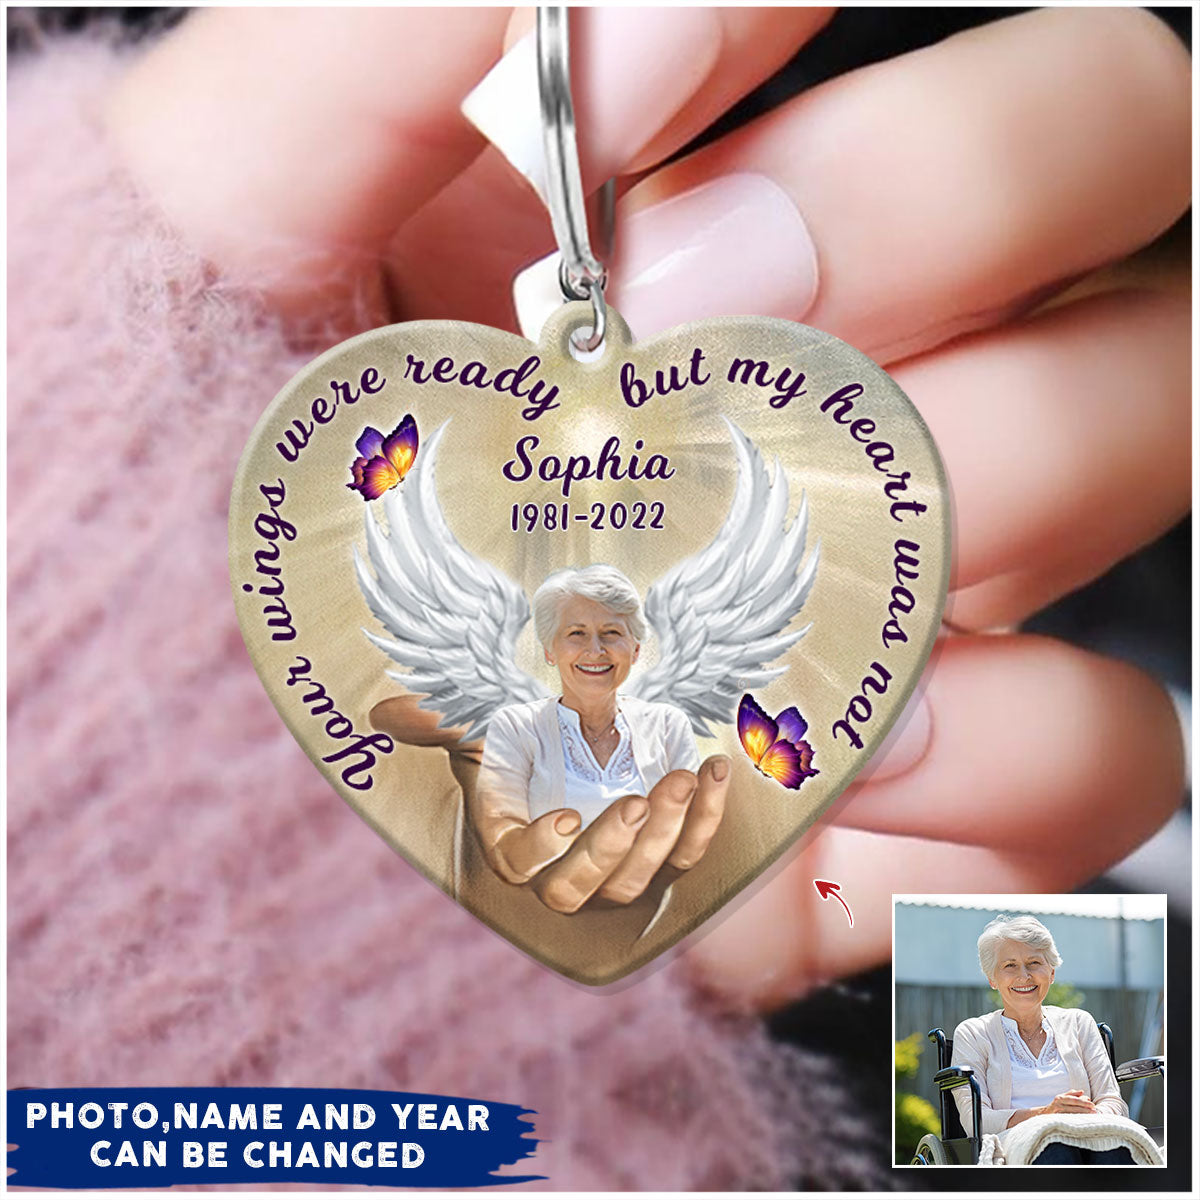 Wings Were Ready But My Heart Was Not Memory Personalized Acrylic Keychain